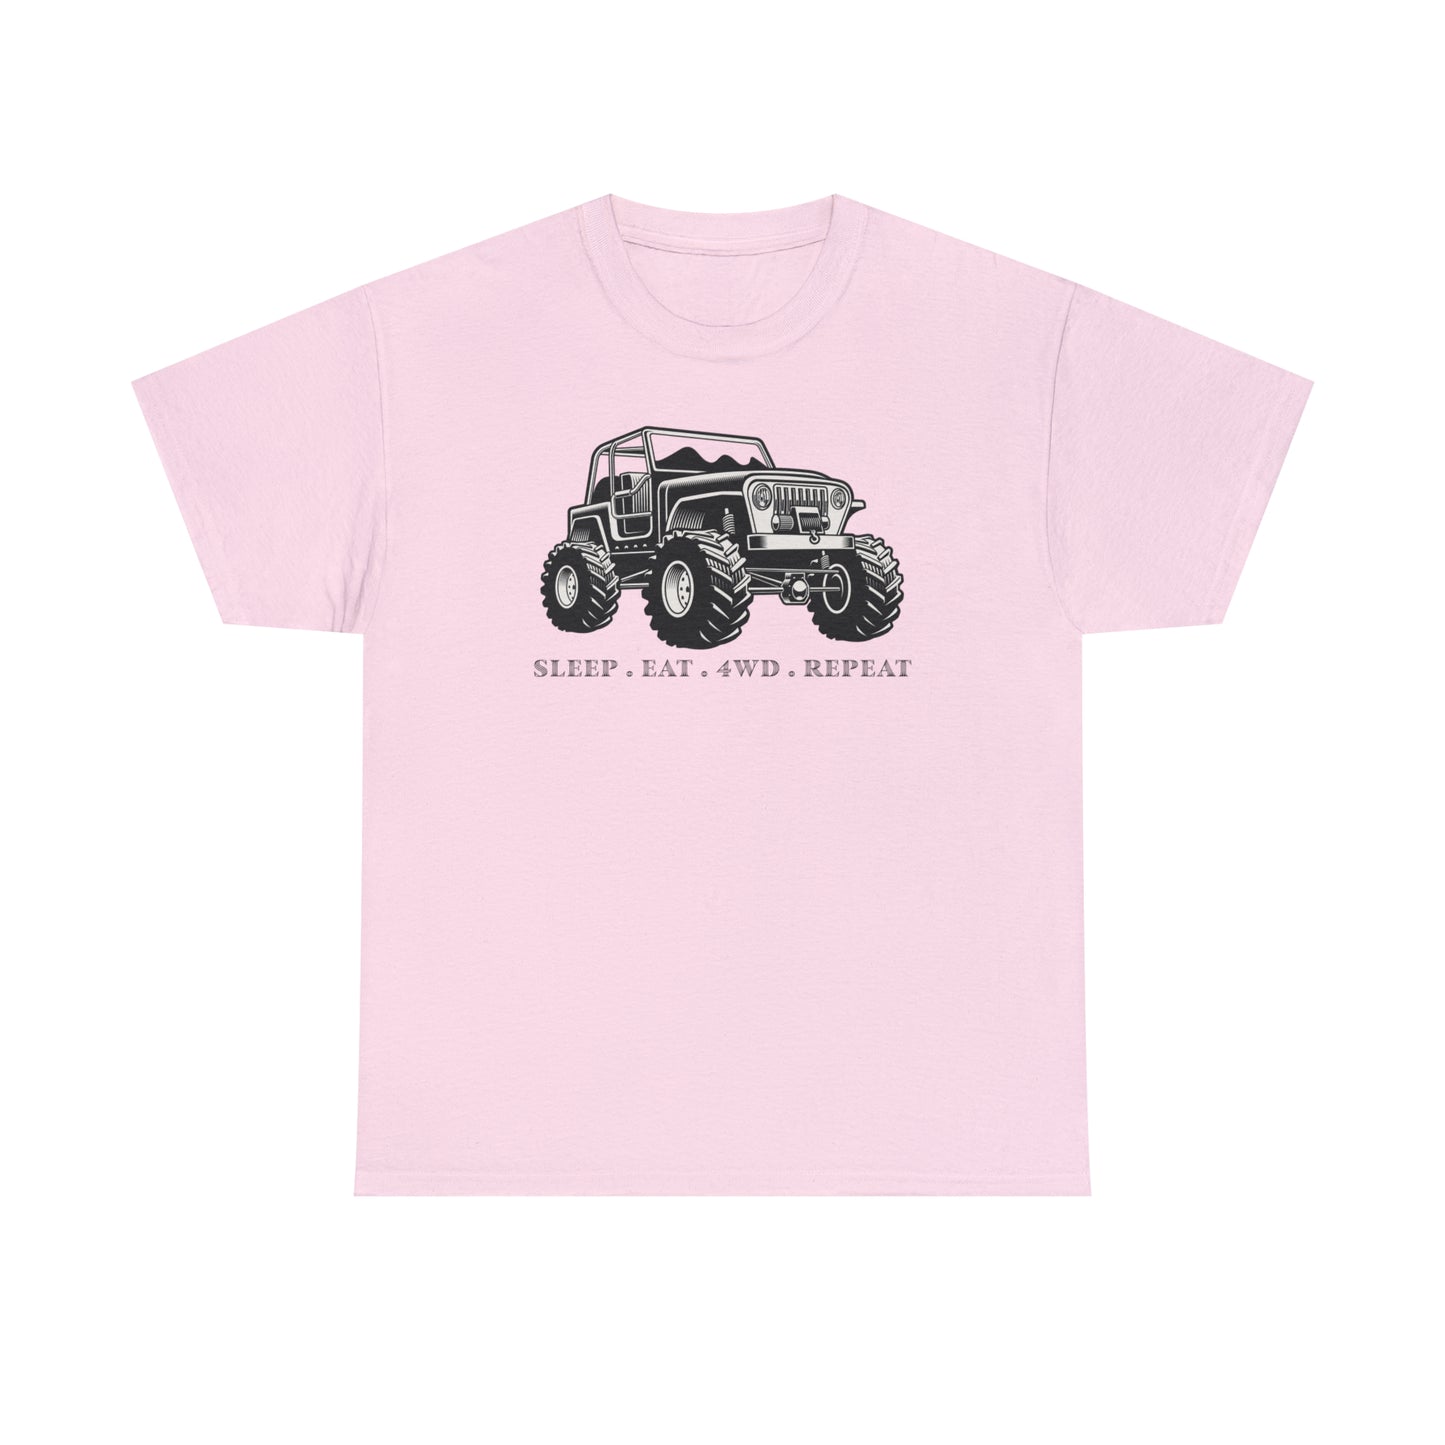 4WD Drive T-Shirt For Exploration TShirt For Adventure T Shirt For 4WD Enthusiast Shirt For 4WD Club Shirt